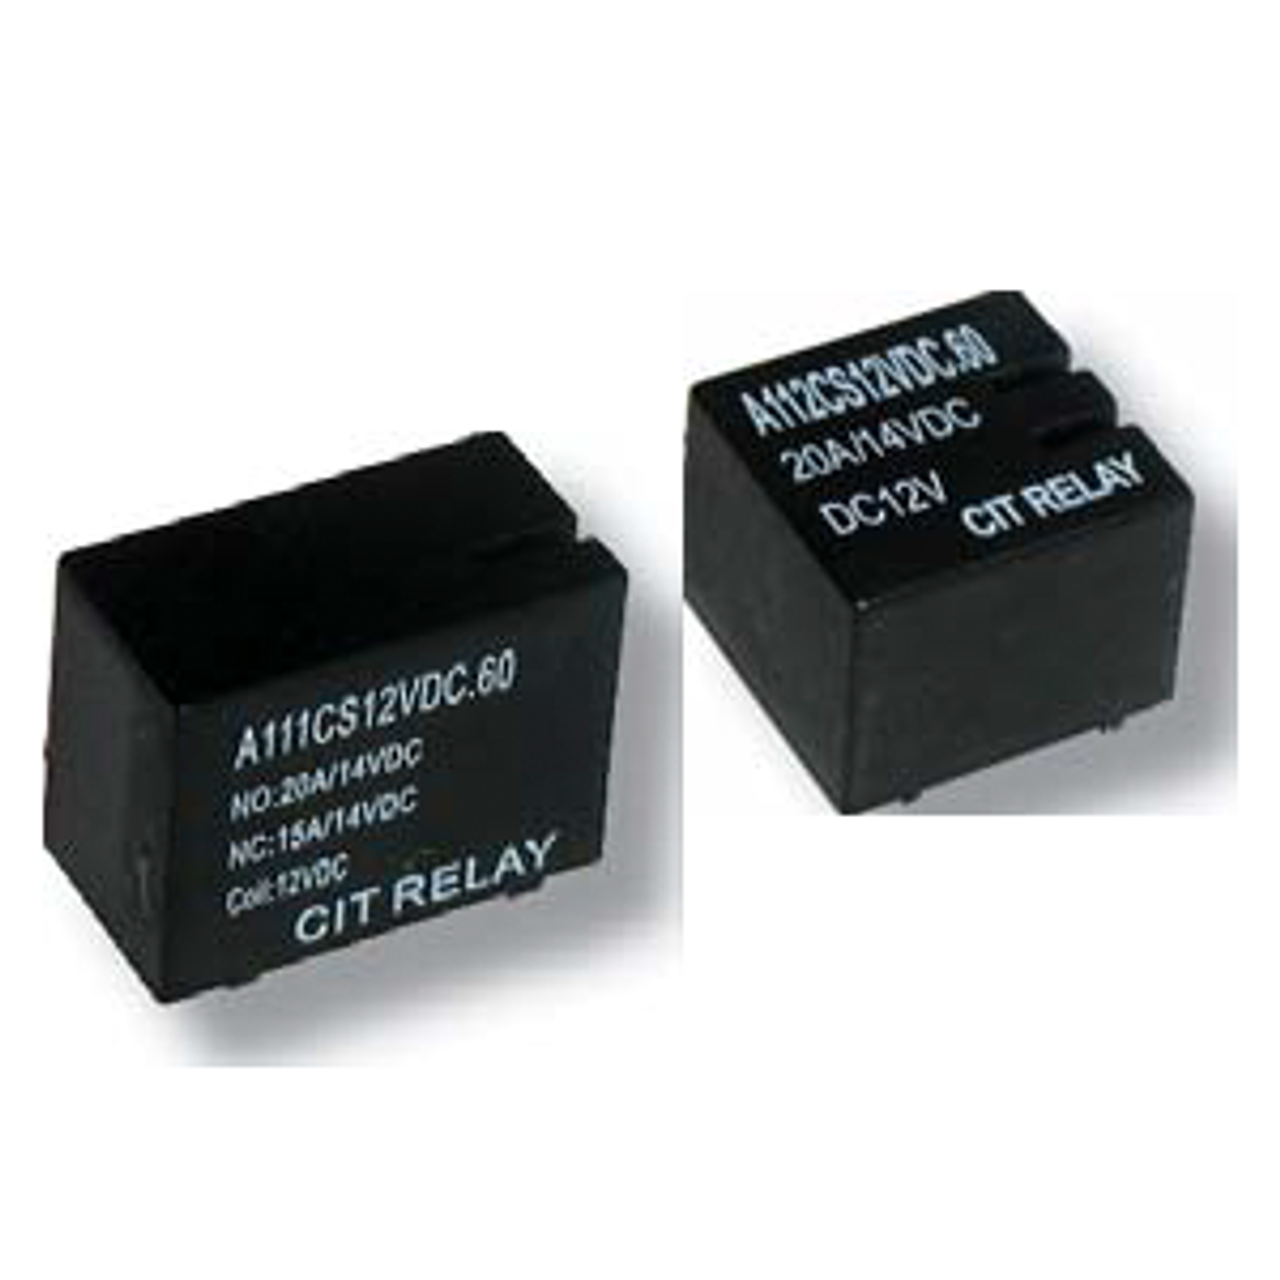 CIT Relay and Switch A111CS12VDC.60 Automotive Relays